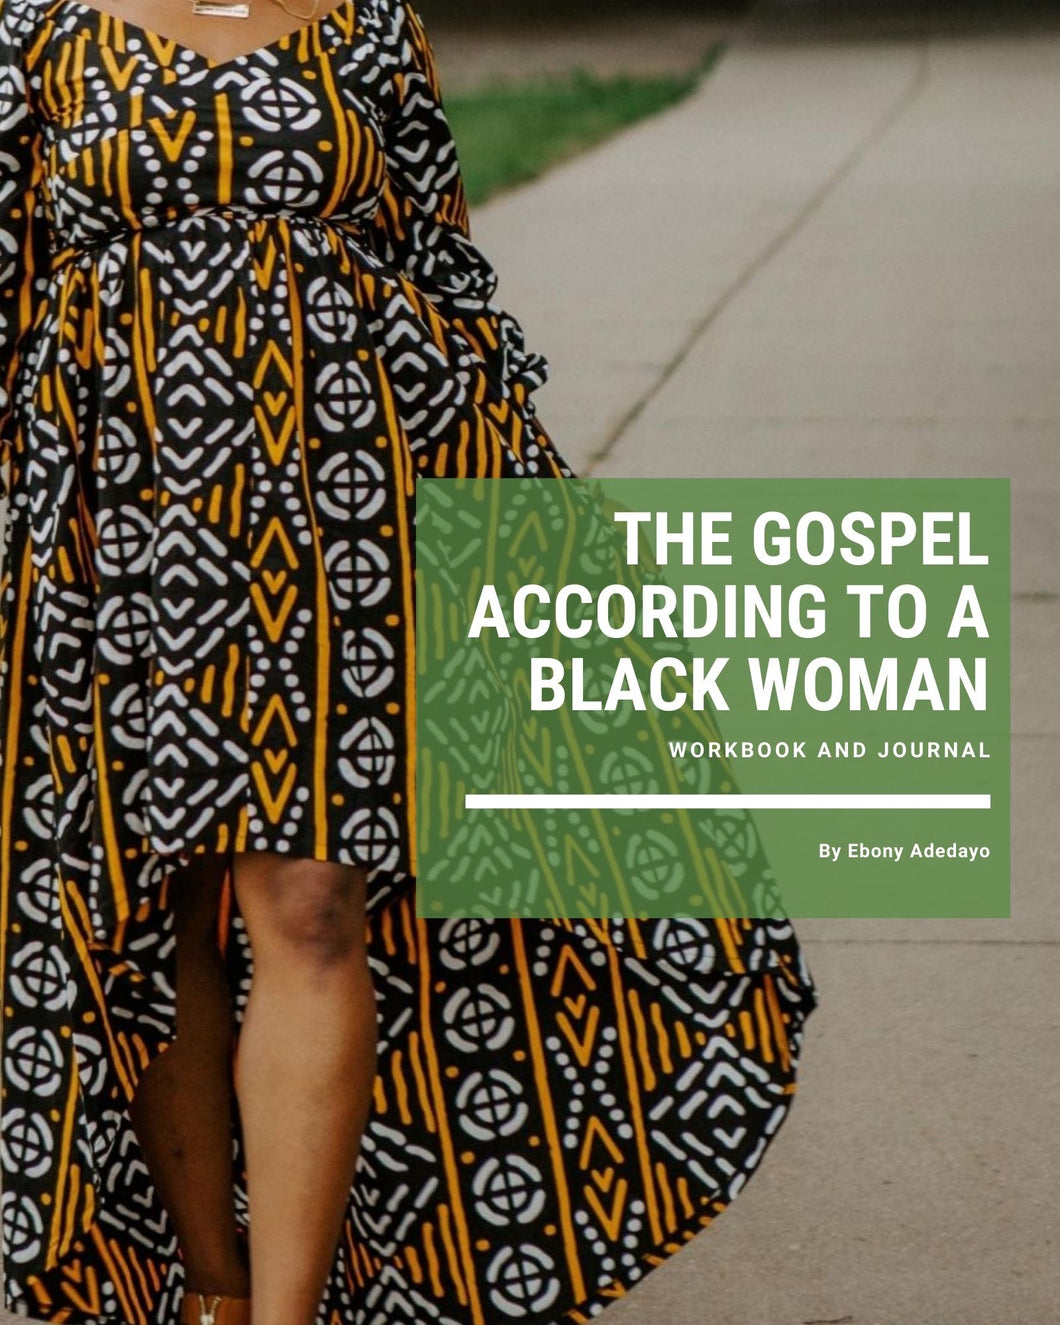 The Gospel According to a Black Woman Workbook and Journal